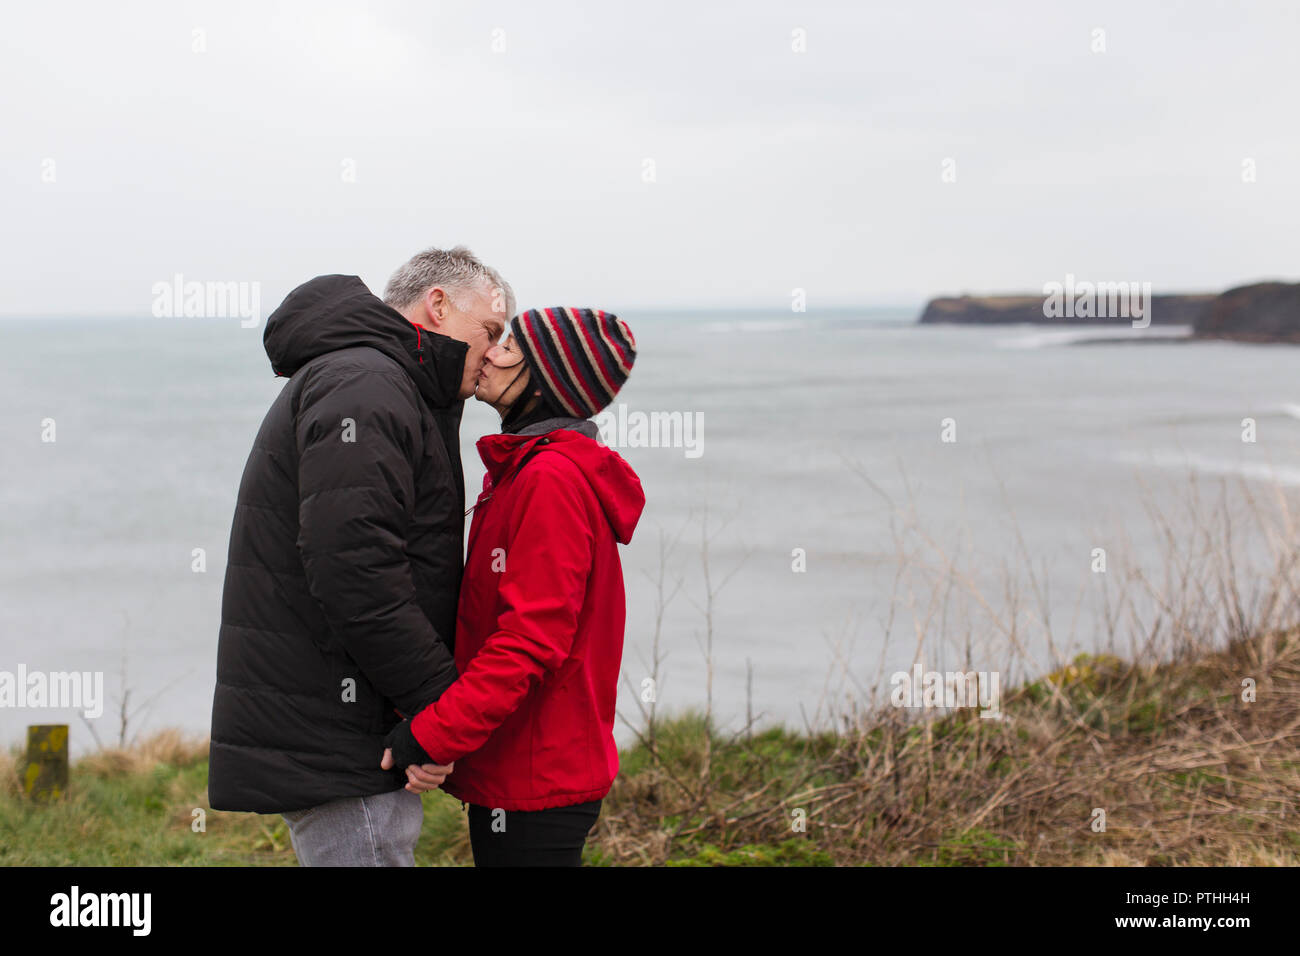 Affectionate couple kissing on cliff overlooking ocean Stock Photo